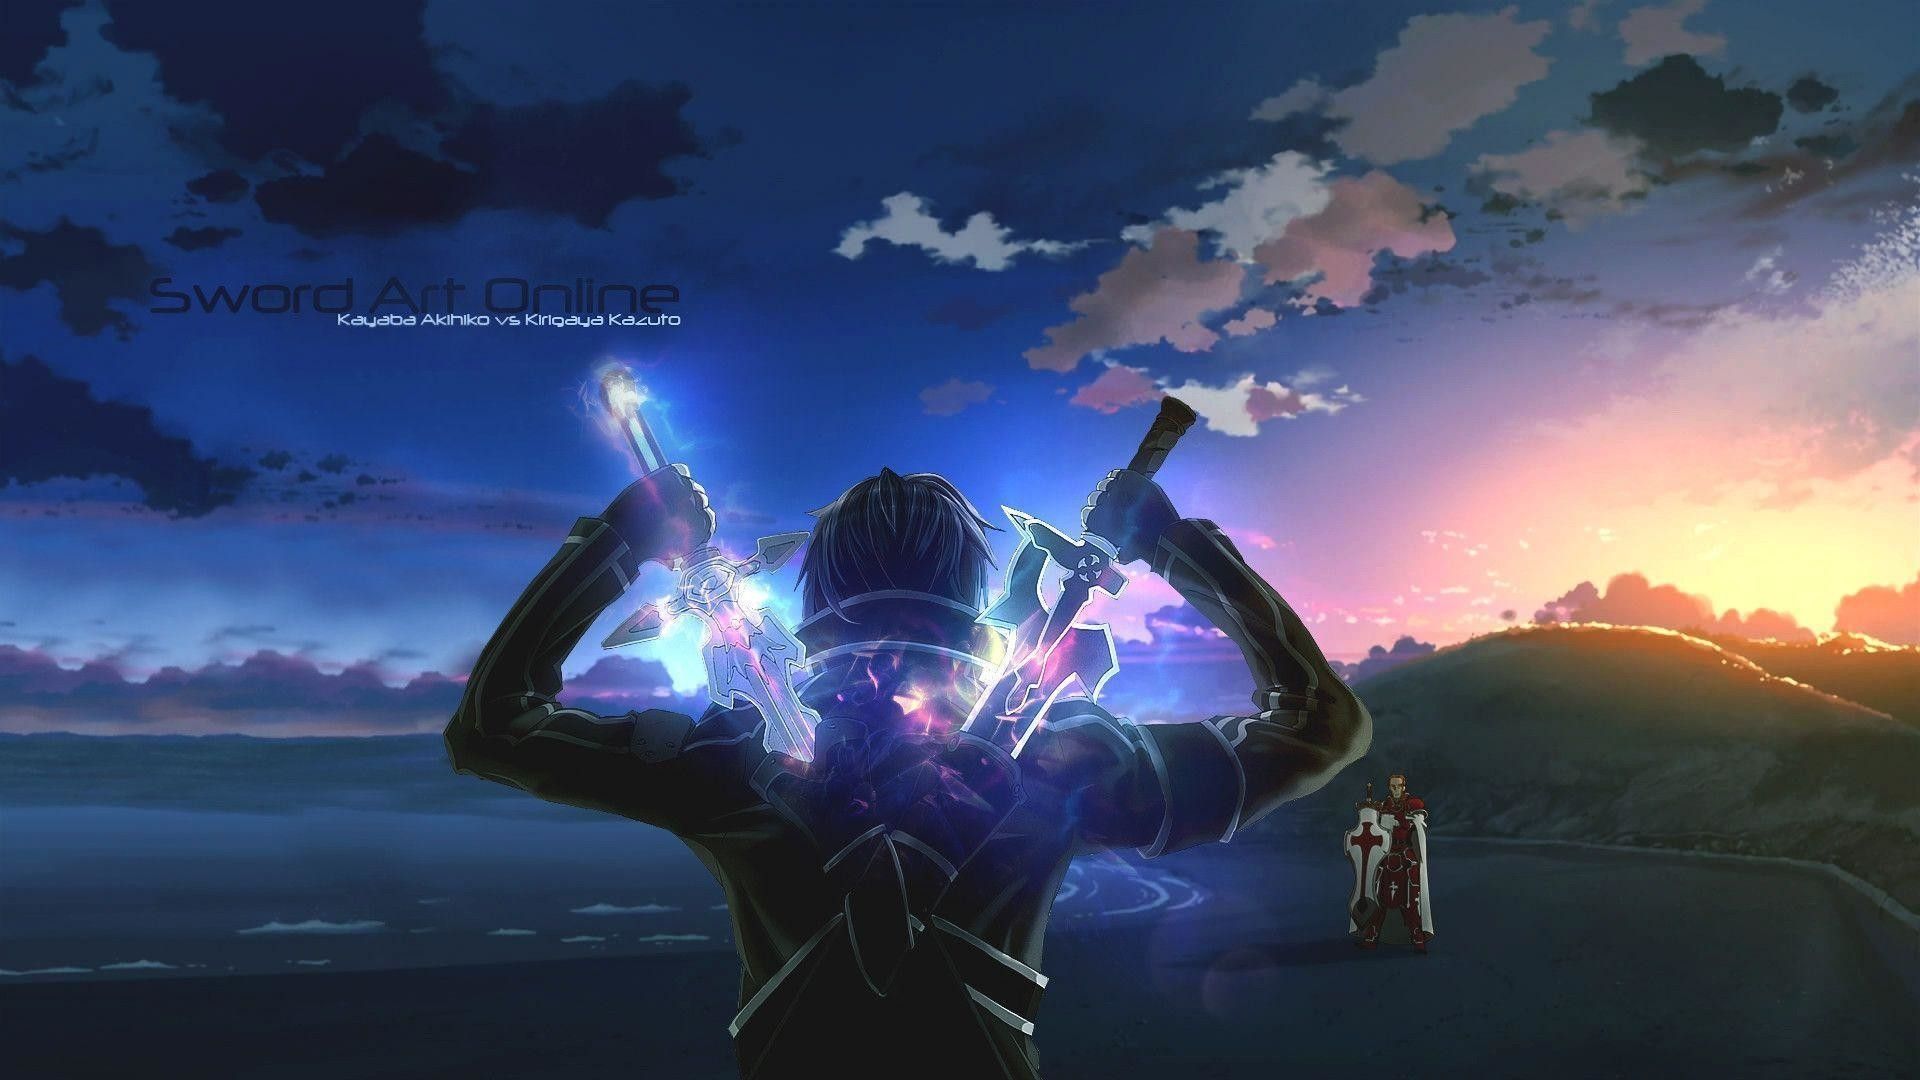 Action Anime Wallpaper Free Action Anime Background